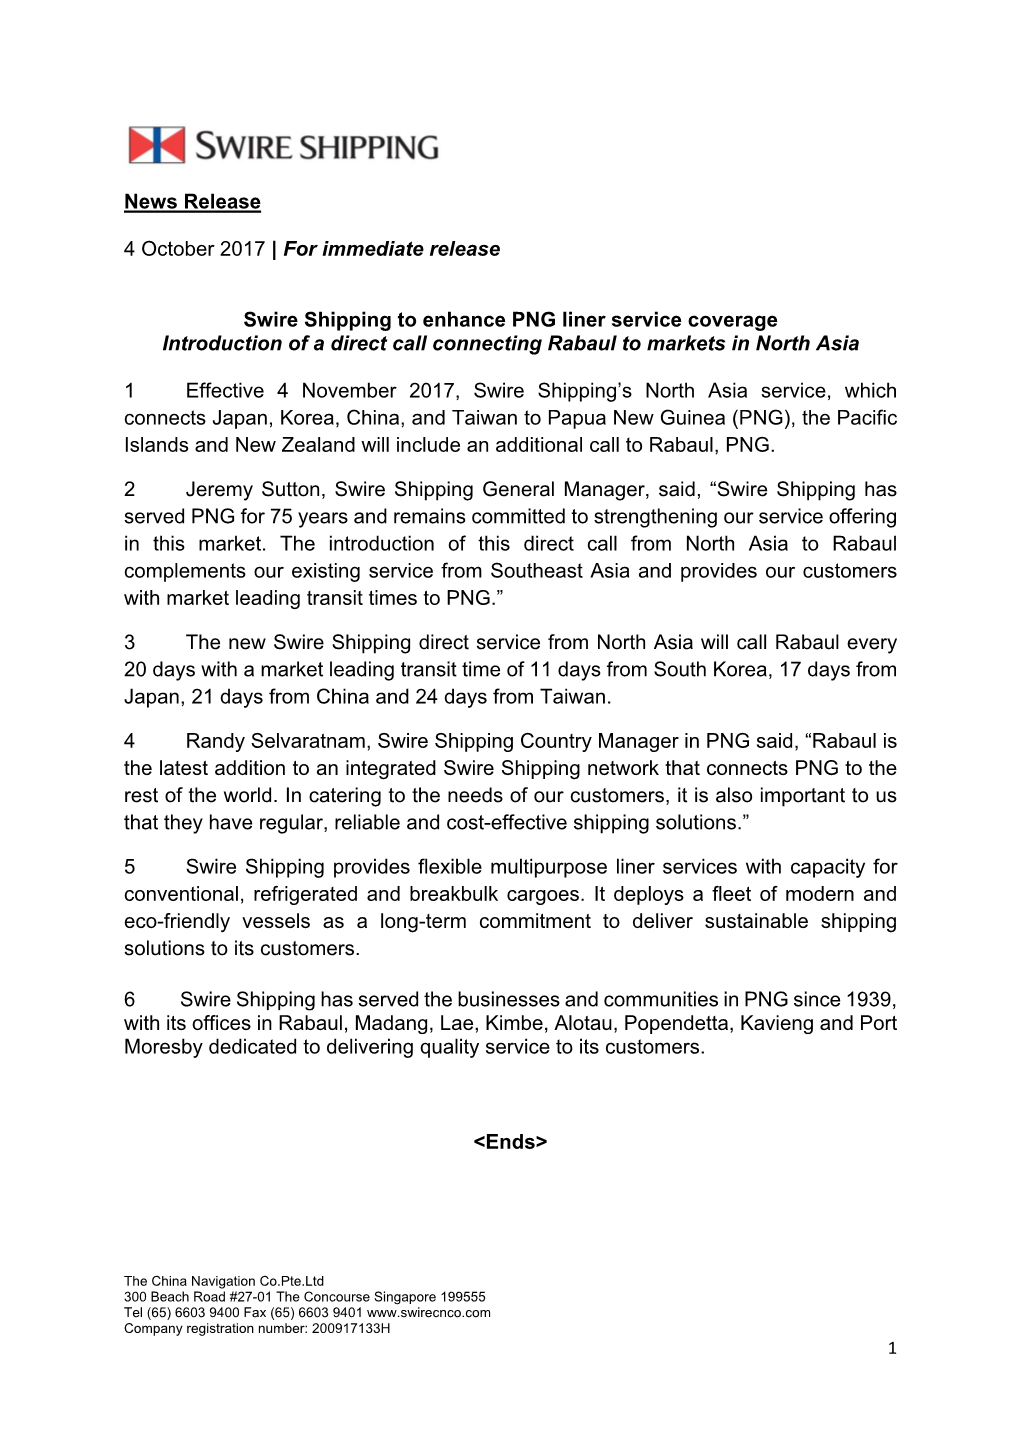 For Immediate Release Swire Shipping to Enhance PNG Liner Service